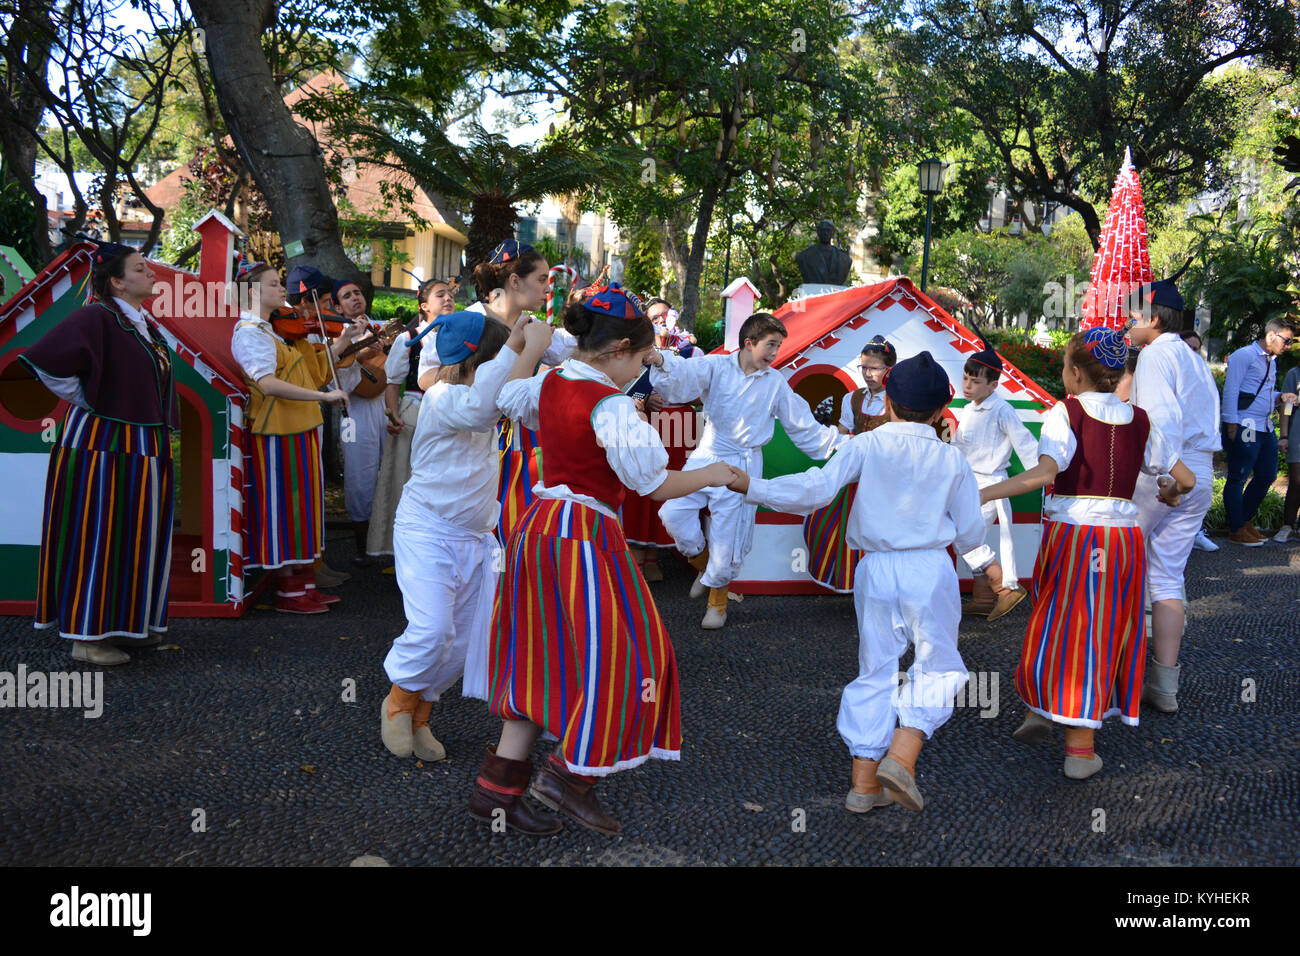 Group of young folk dancers and folk musicians  performing outdoors in the Municipal Gardens in Funchal, Madeira, at Christmas time. Stock Photo